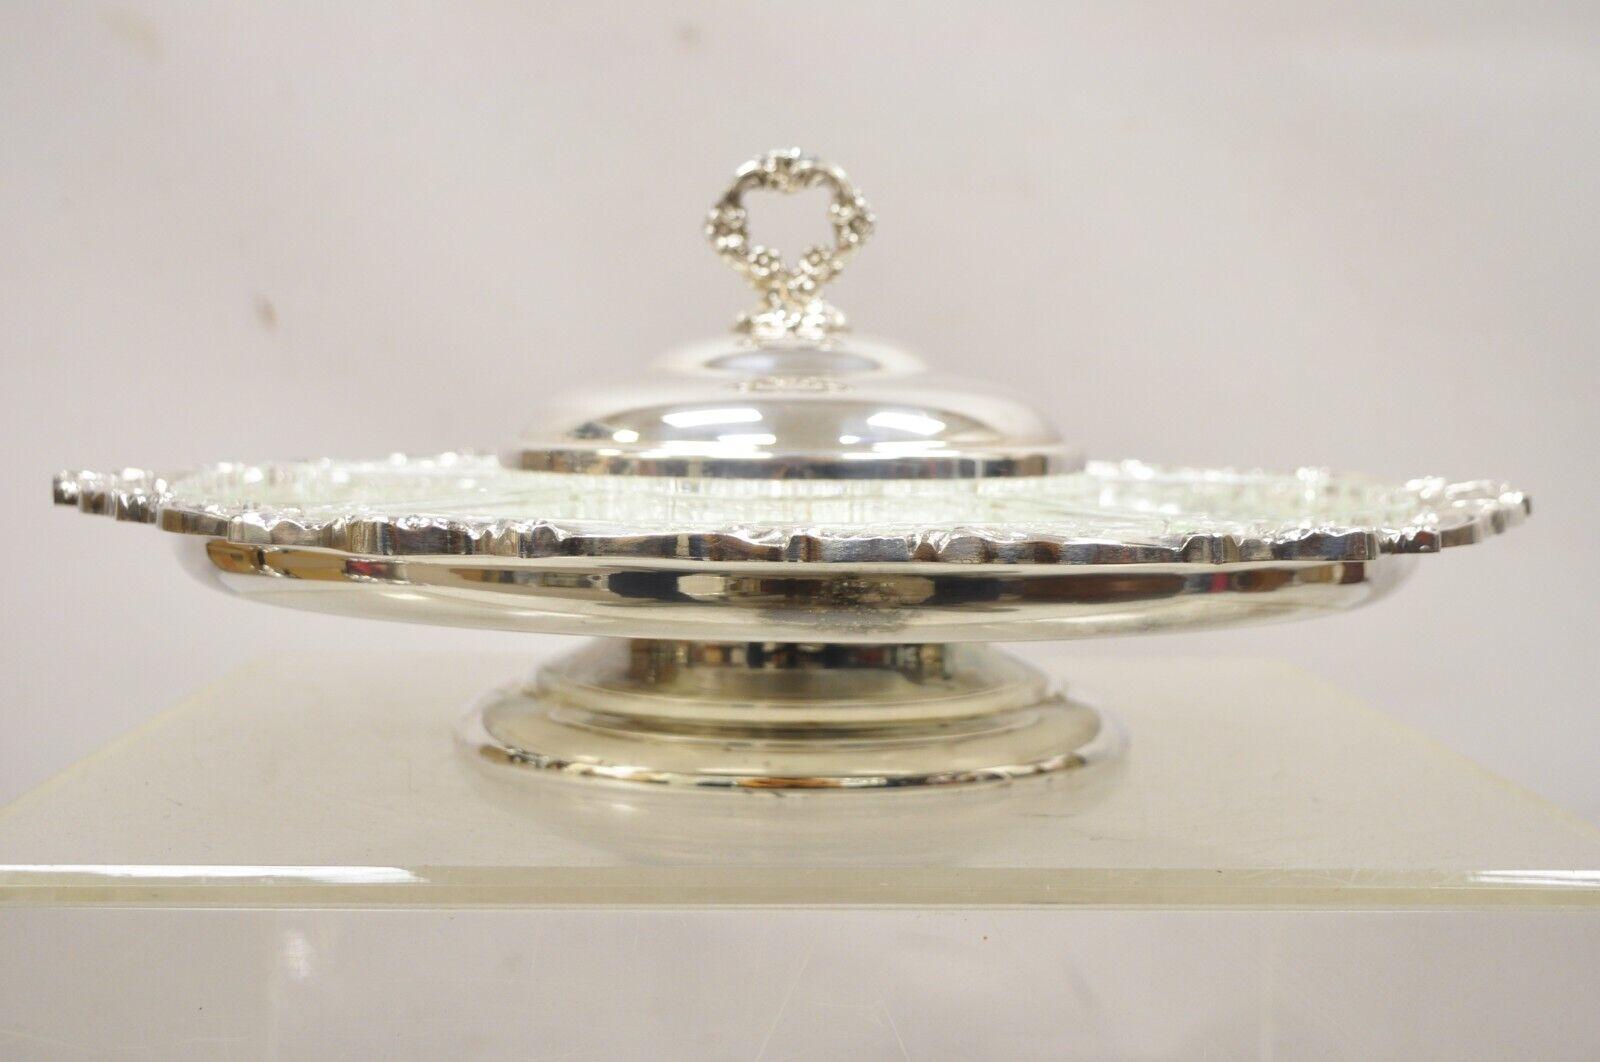 Vintage Sheridan Silver Plated Lazy Susan Revolving Serving Party Platter Tray with 5 Glass Inserts and 1 Glass Center Bowl with Lid.
Circa Mid 20th Century. Measurements:  7